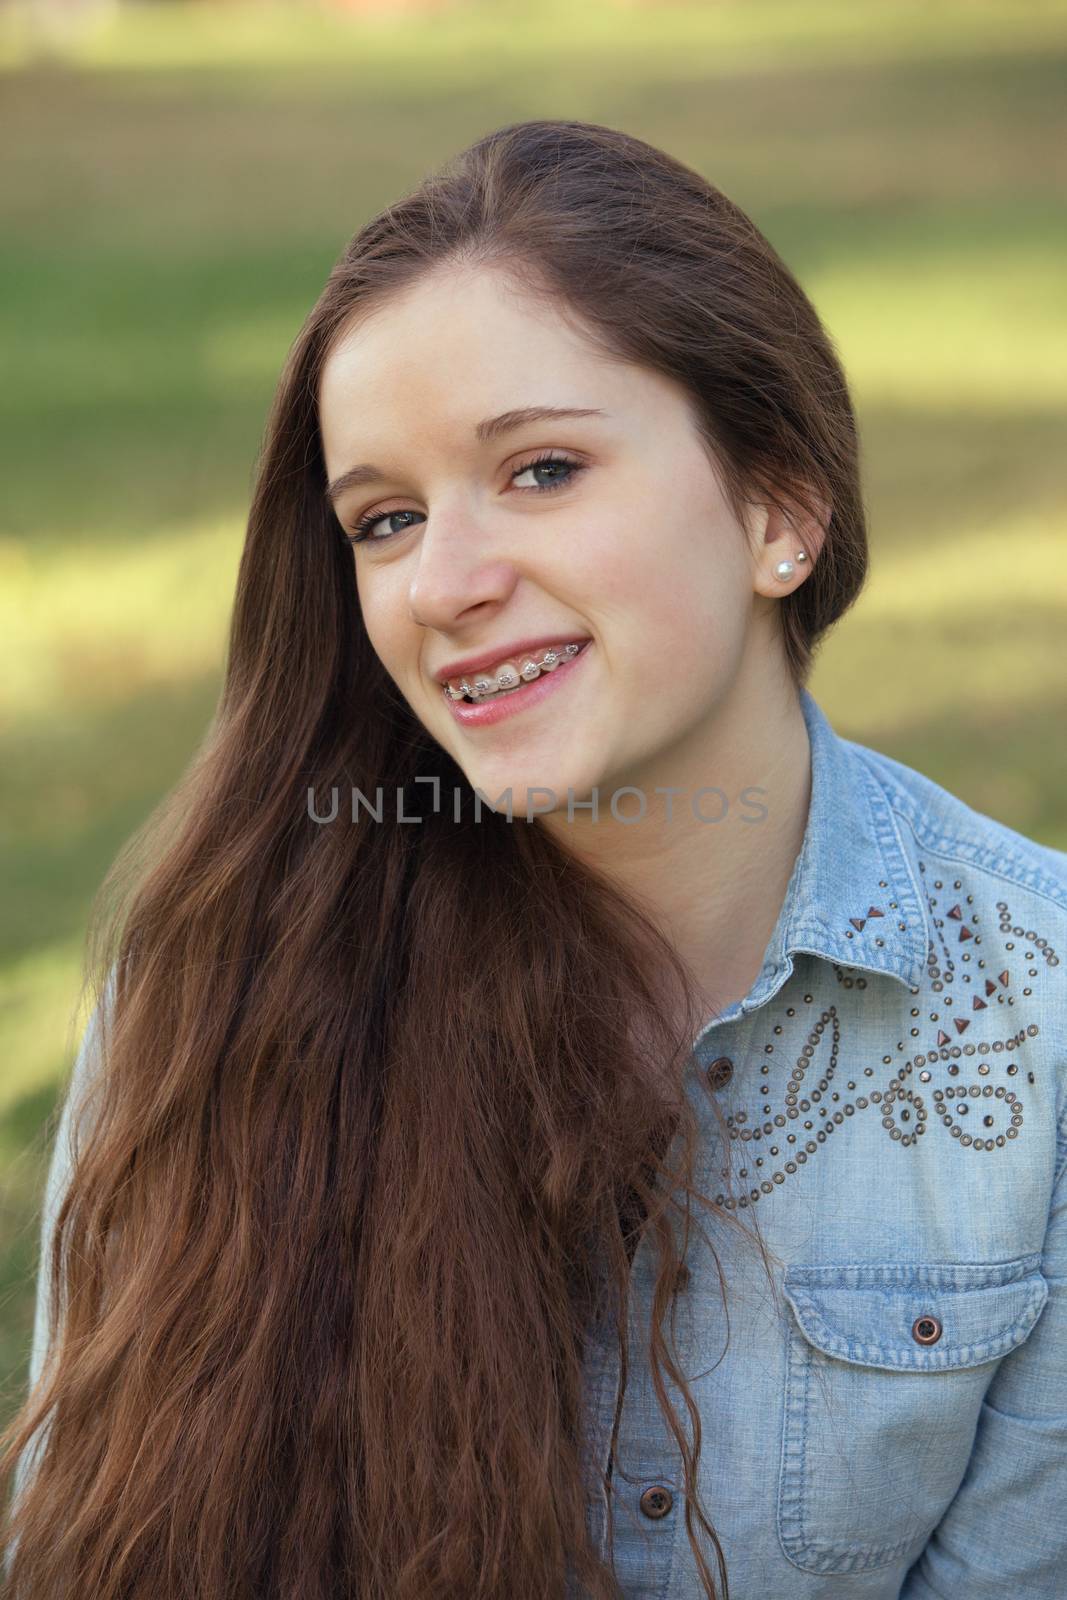 Caucasian teenager with long hair sitting outdoors